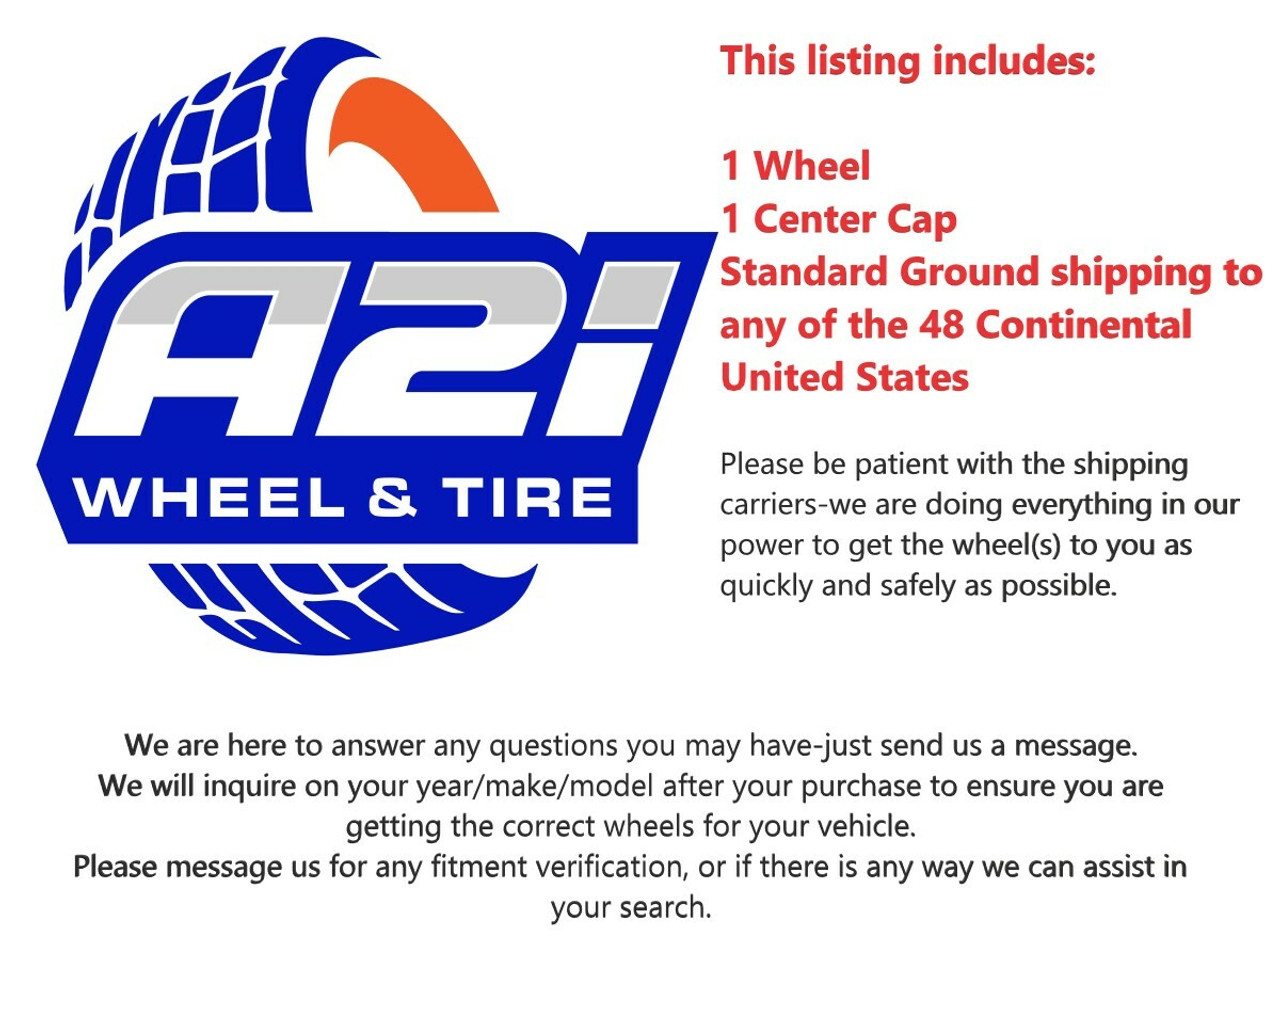 20" Gear Off Road 761RM 20x12 8x6.5 Wheel -44mm Lifted For Chevy GMC Ram Rim